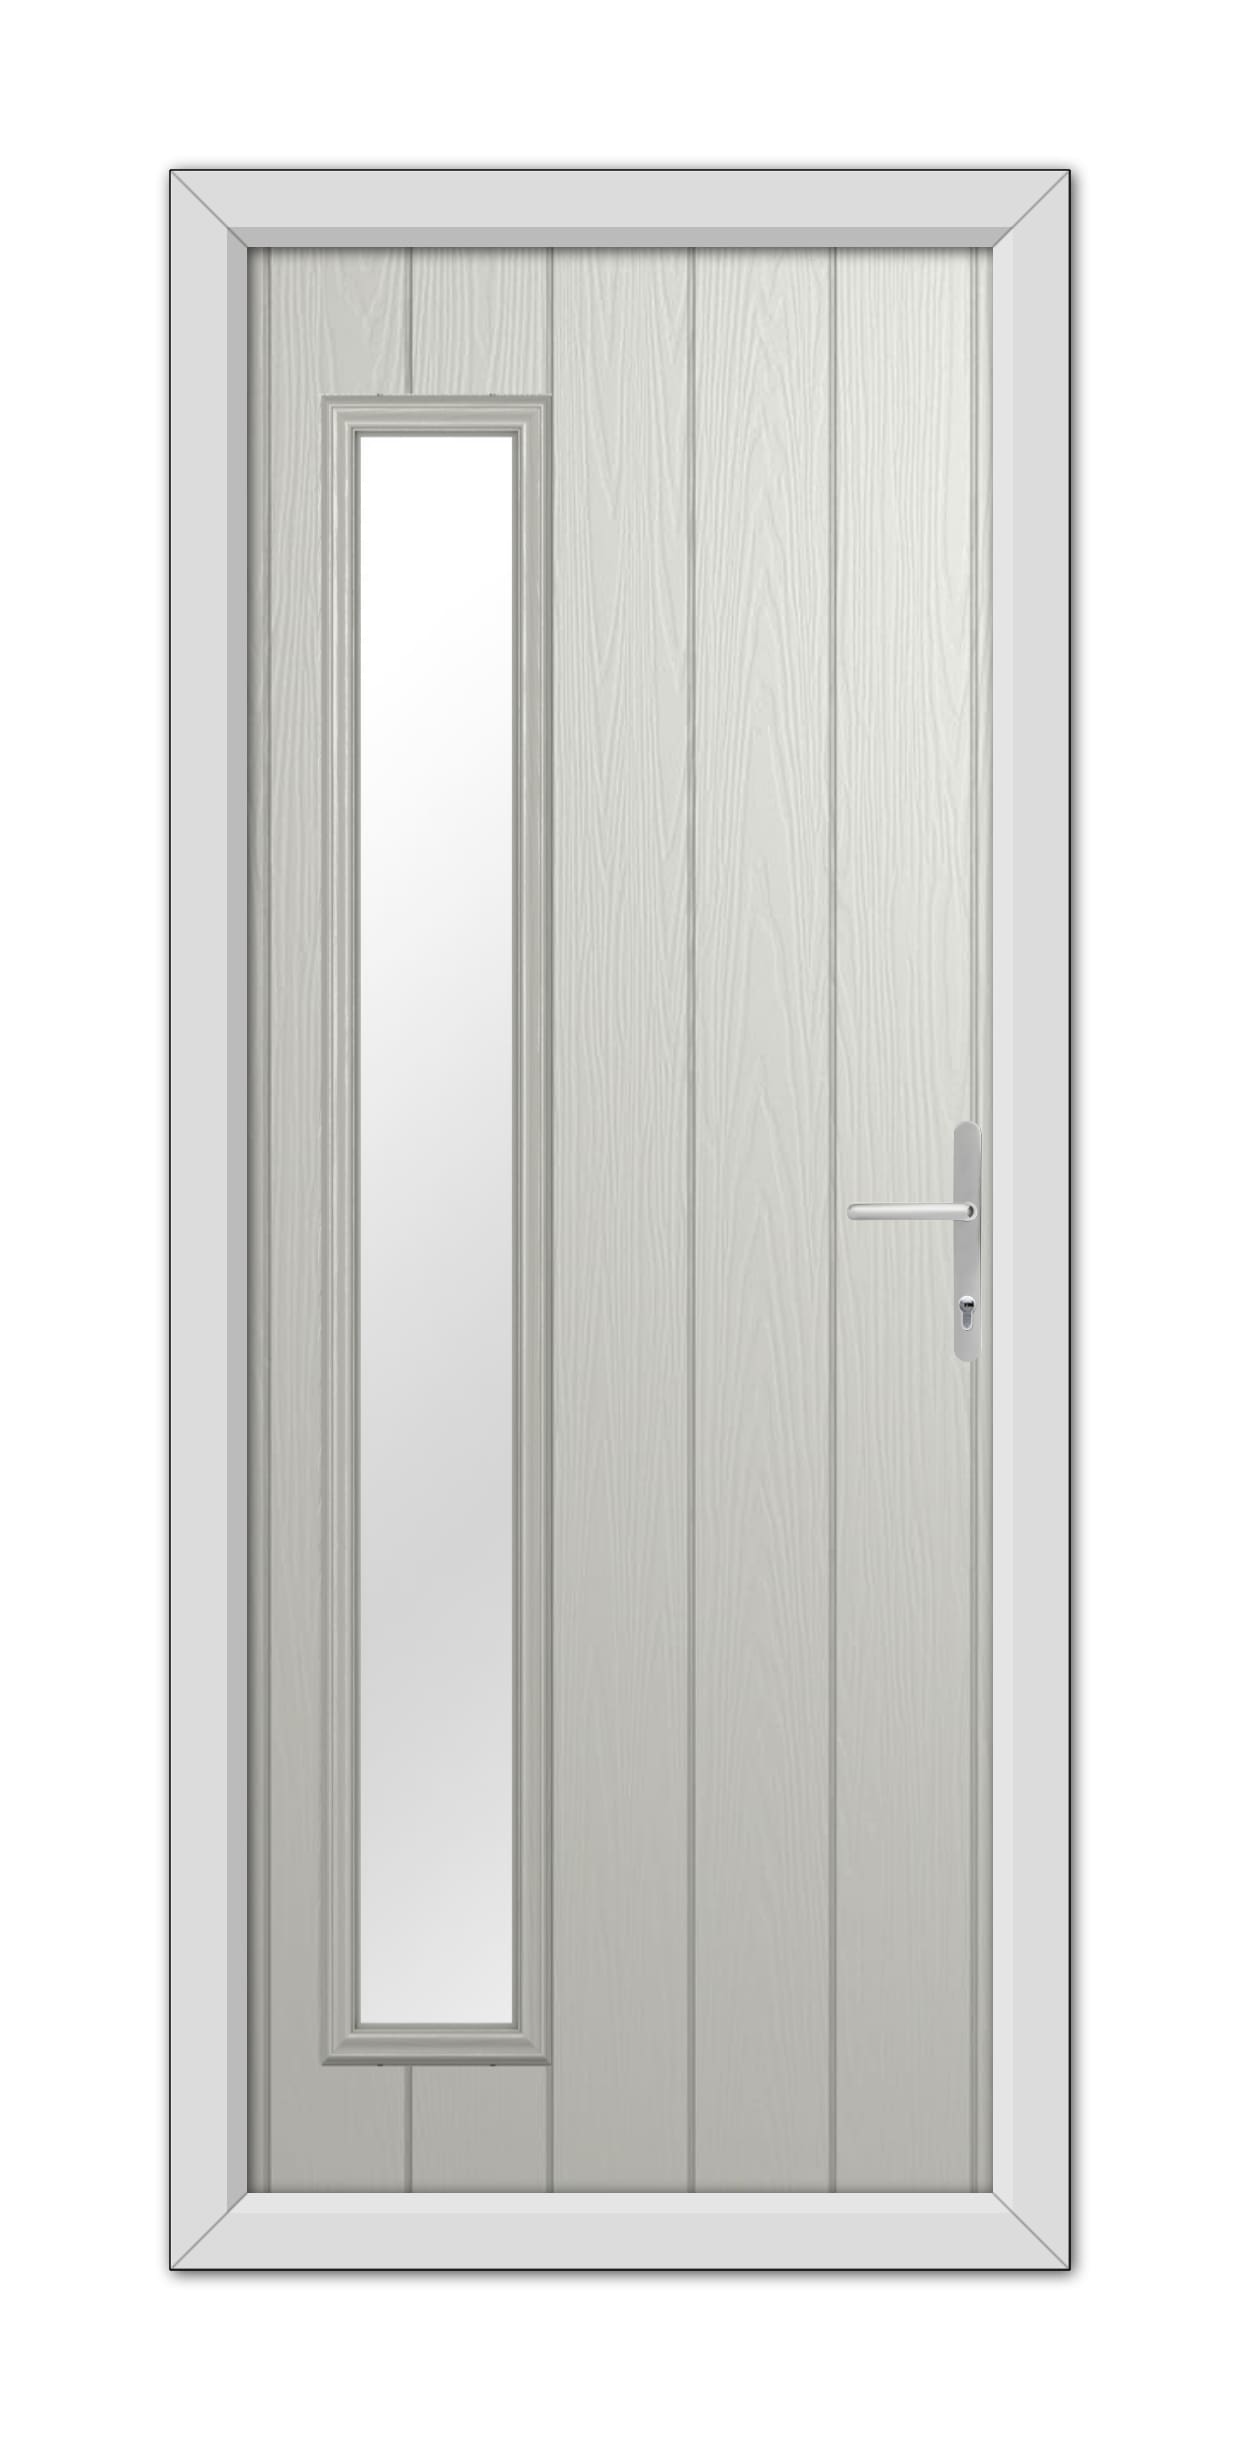 A Agate Grey Sutherland Composite Door 48mm Timber Core featuring a vertical, rectangular glass panel positioned towards the left and a metallic handle on the right.